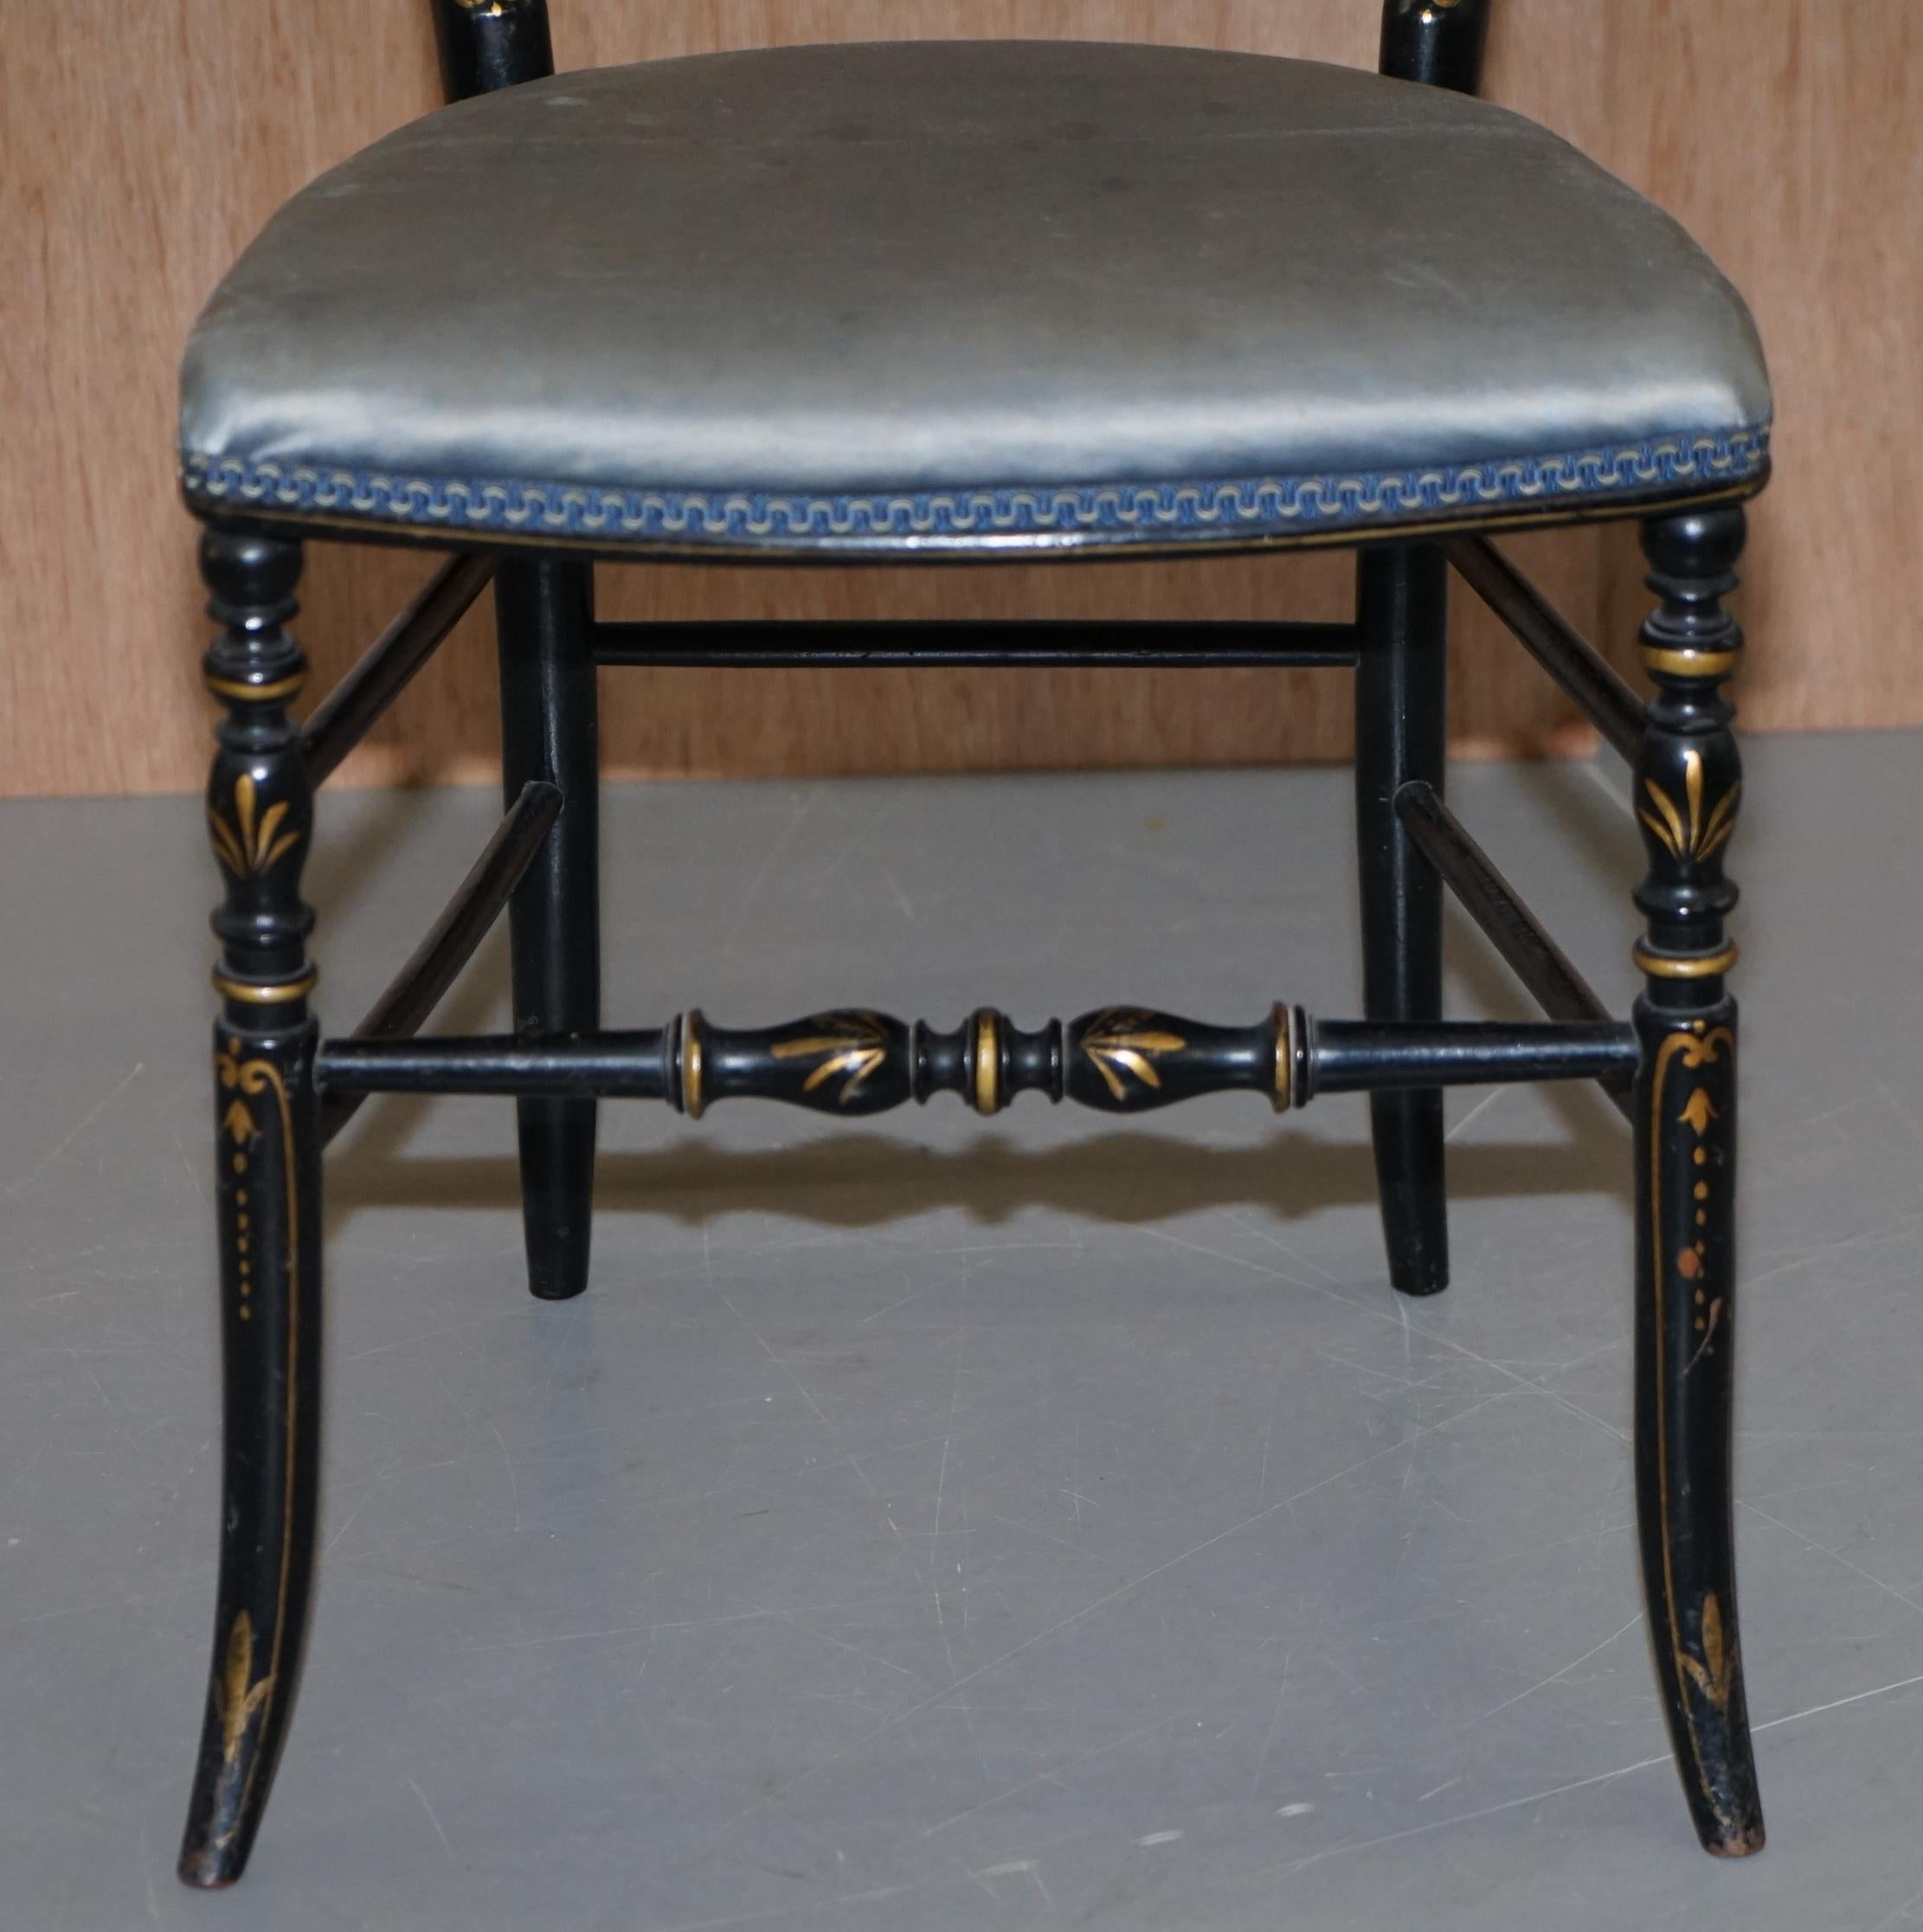 Rare Pair of Regency Floral Hand Painted Ornate Chinoiserie Ebonized Chairs 2